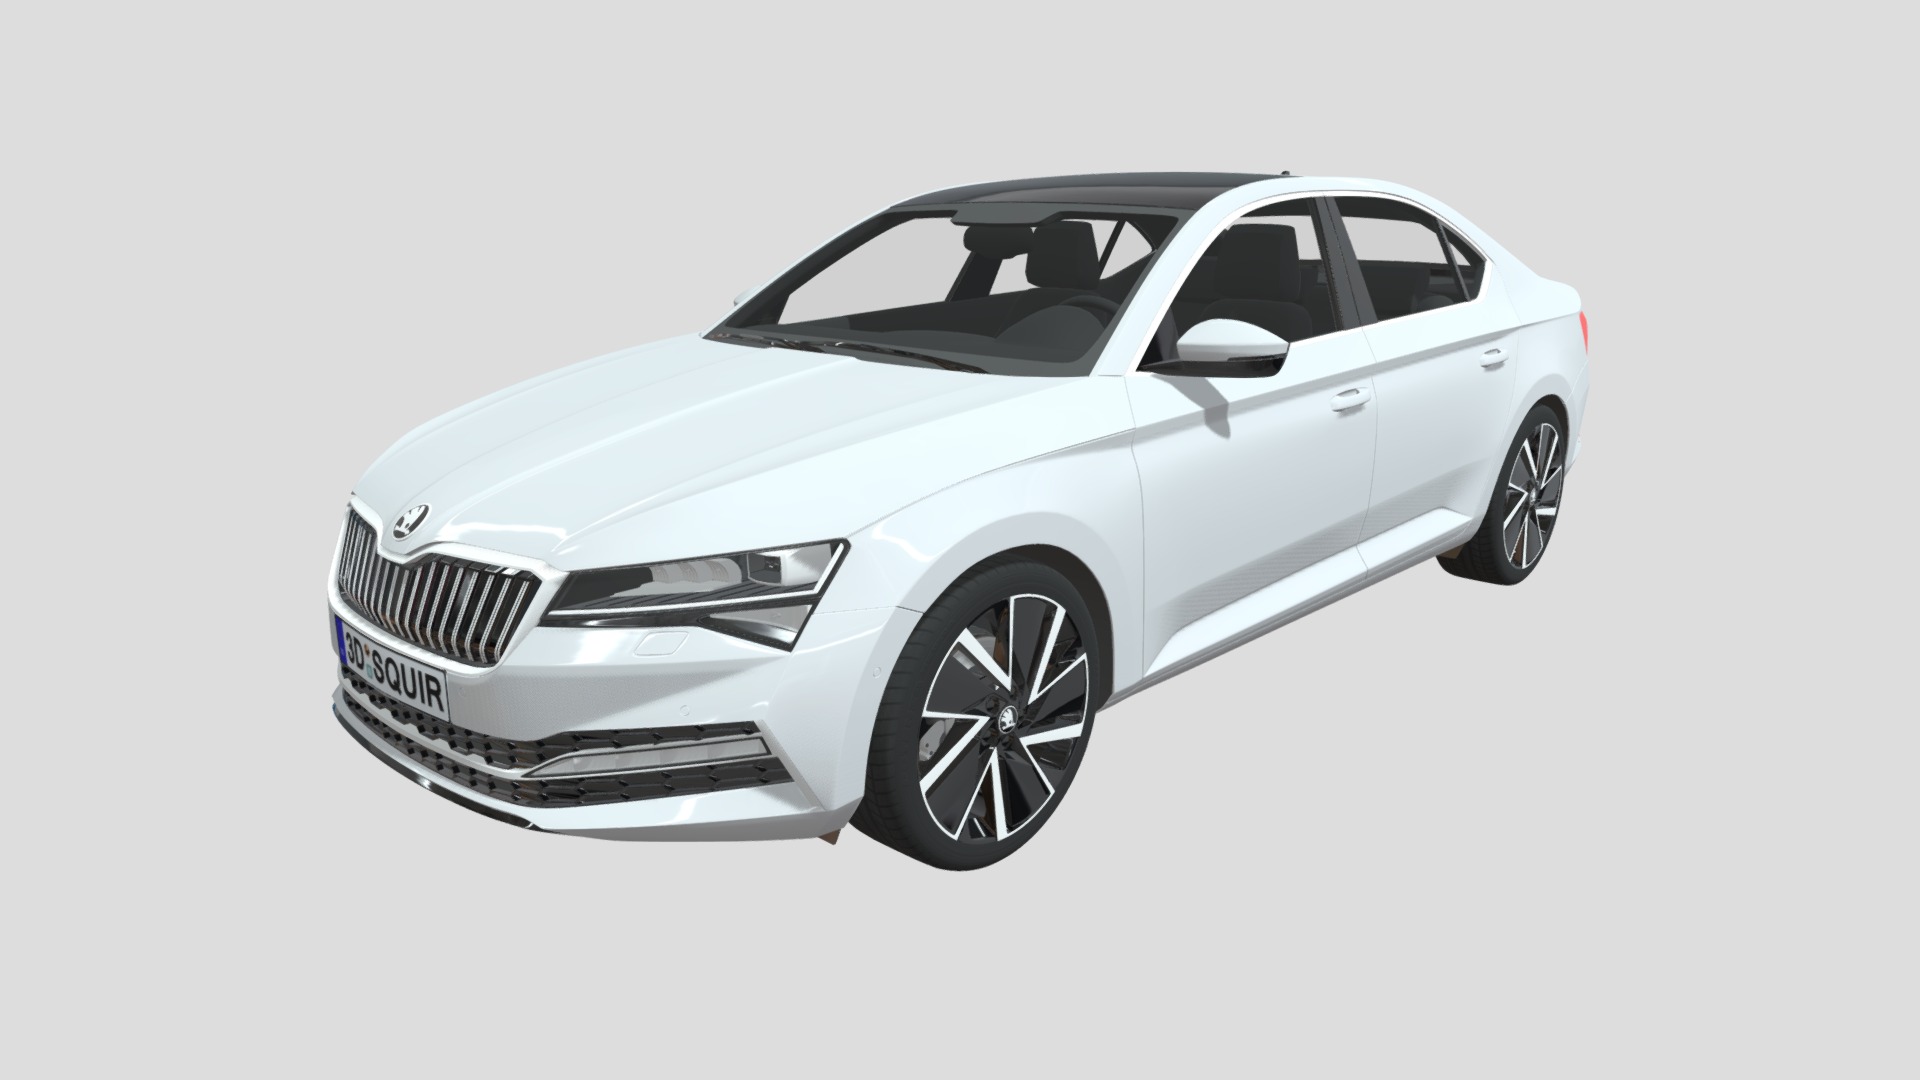 3D model Skoda Superb iV 2020 - This is a 3D model of the Skoda Superb iV 2020. The 3D model is about a white car with a black rim.